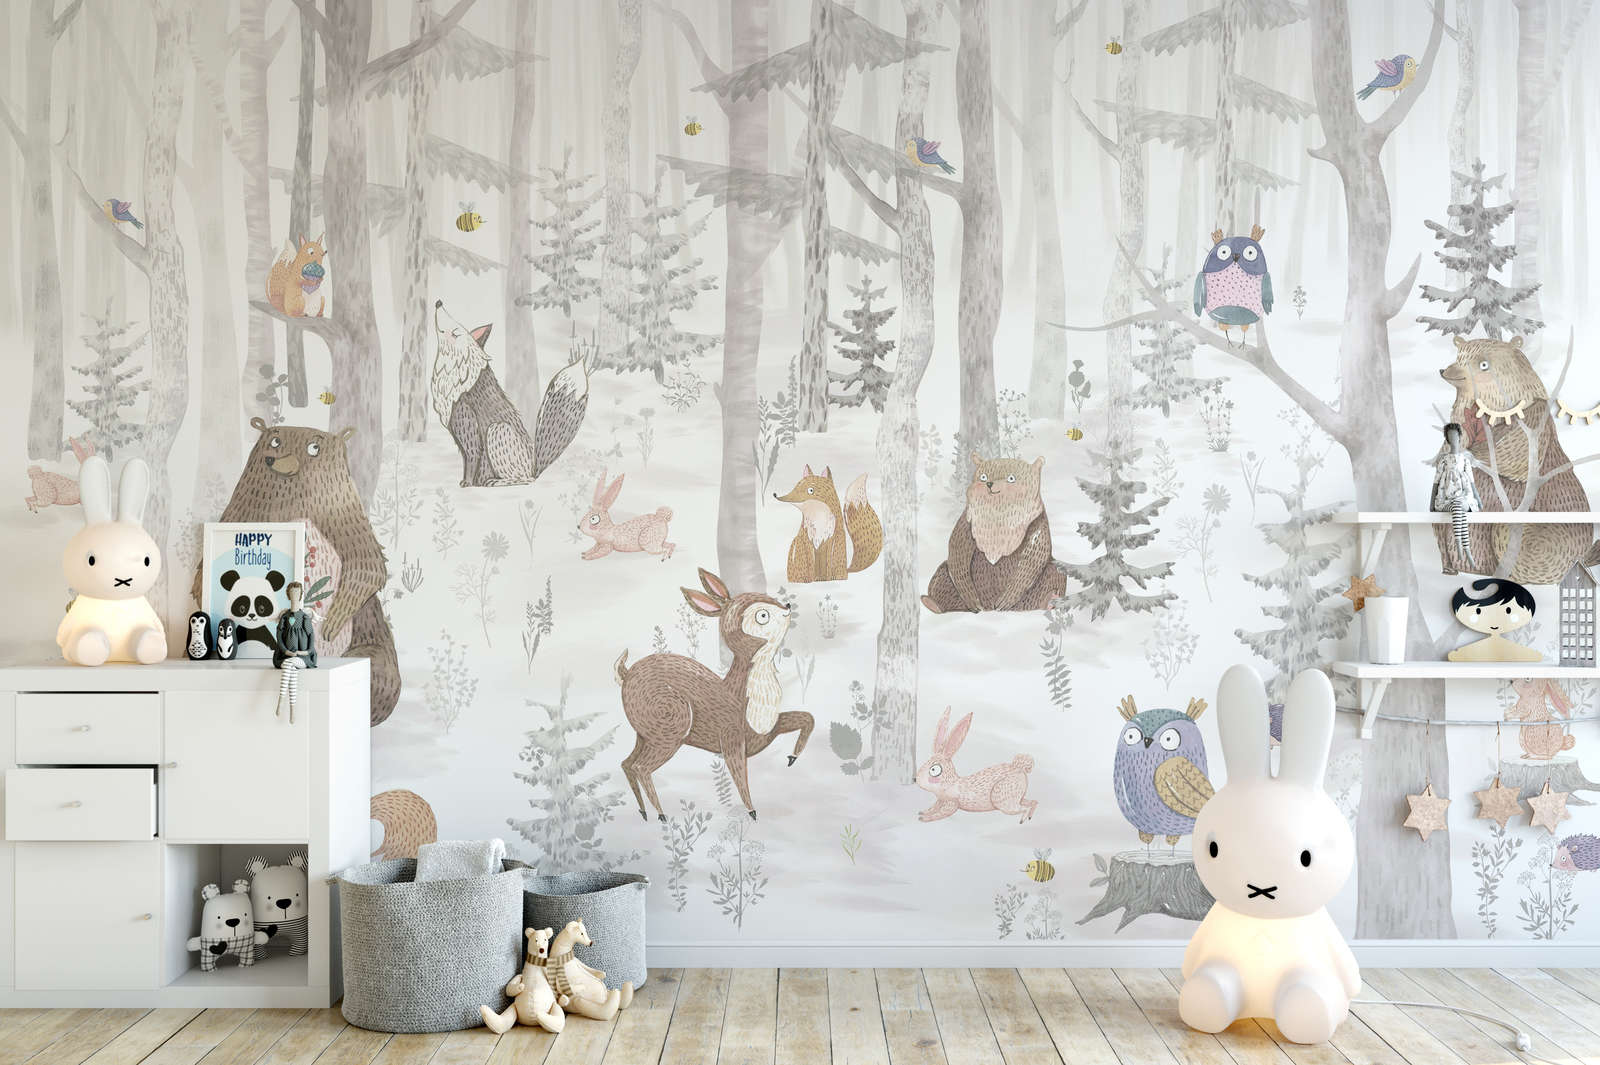             Magic Forest with Animals Wallpaper - Smooth & pearlescent fleece
        